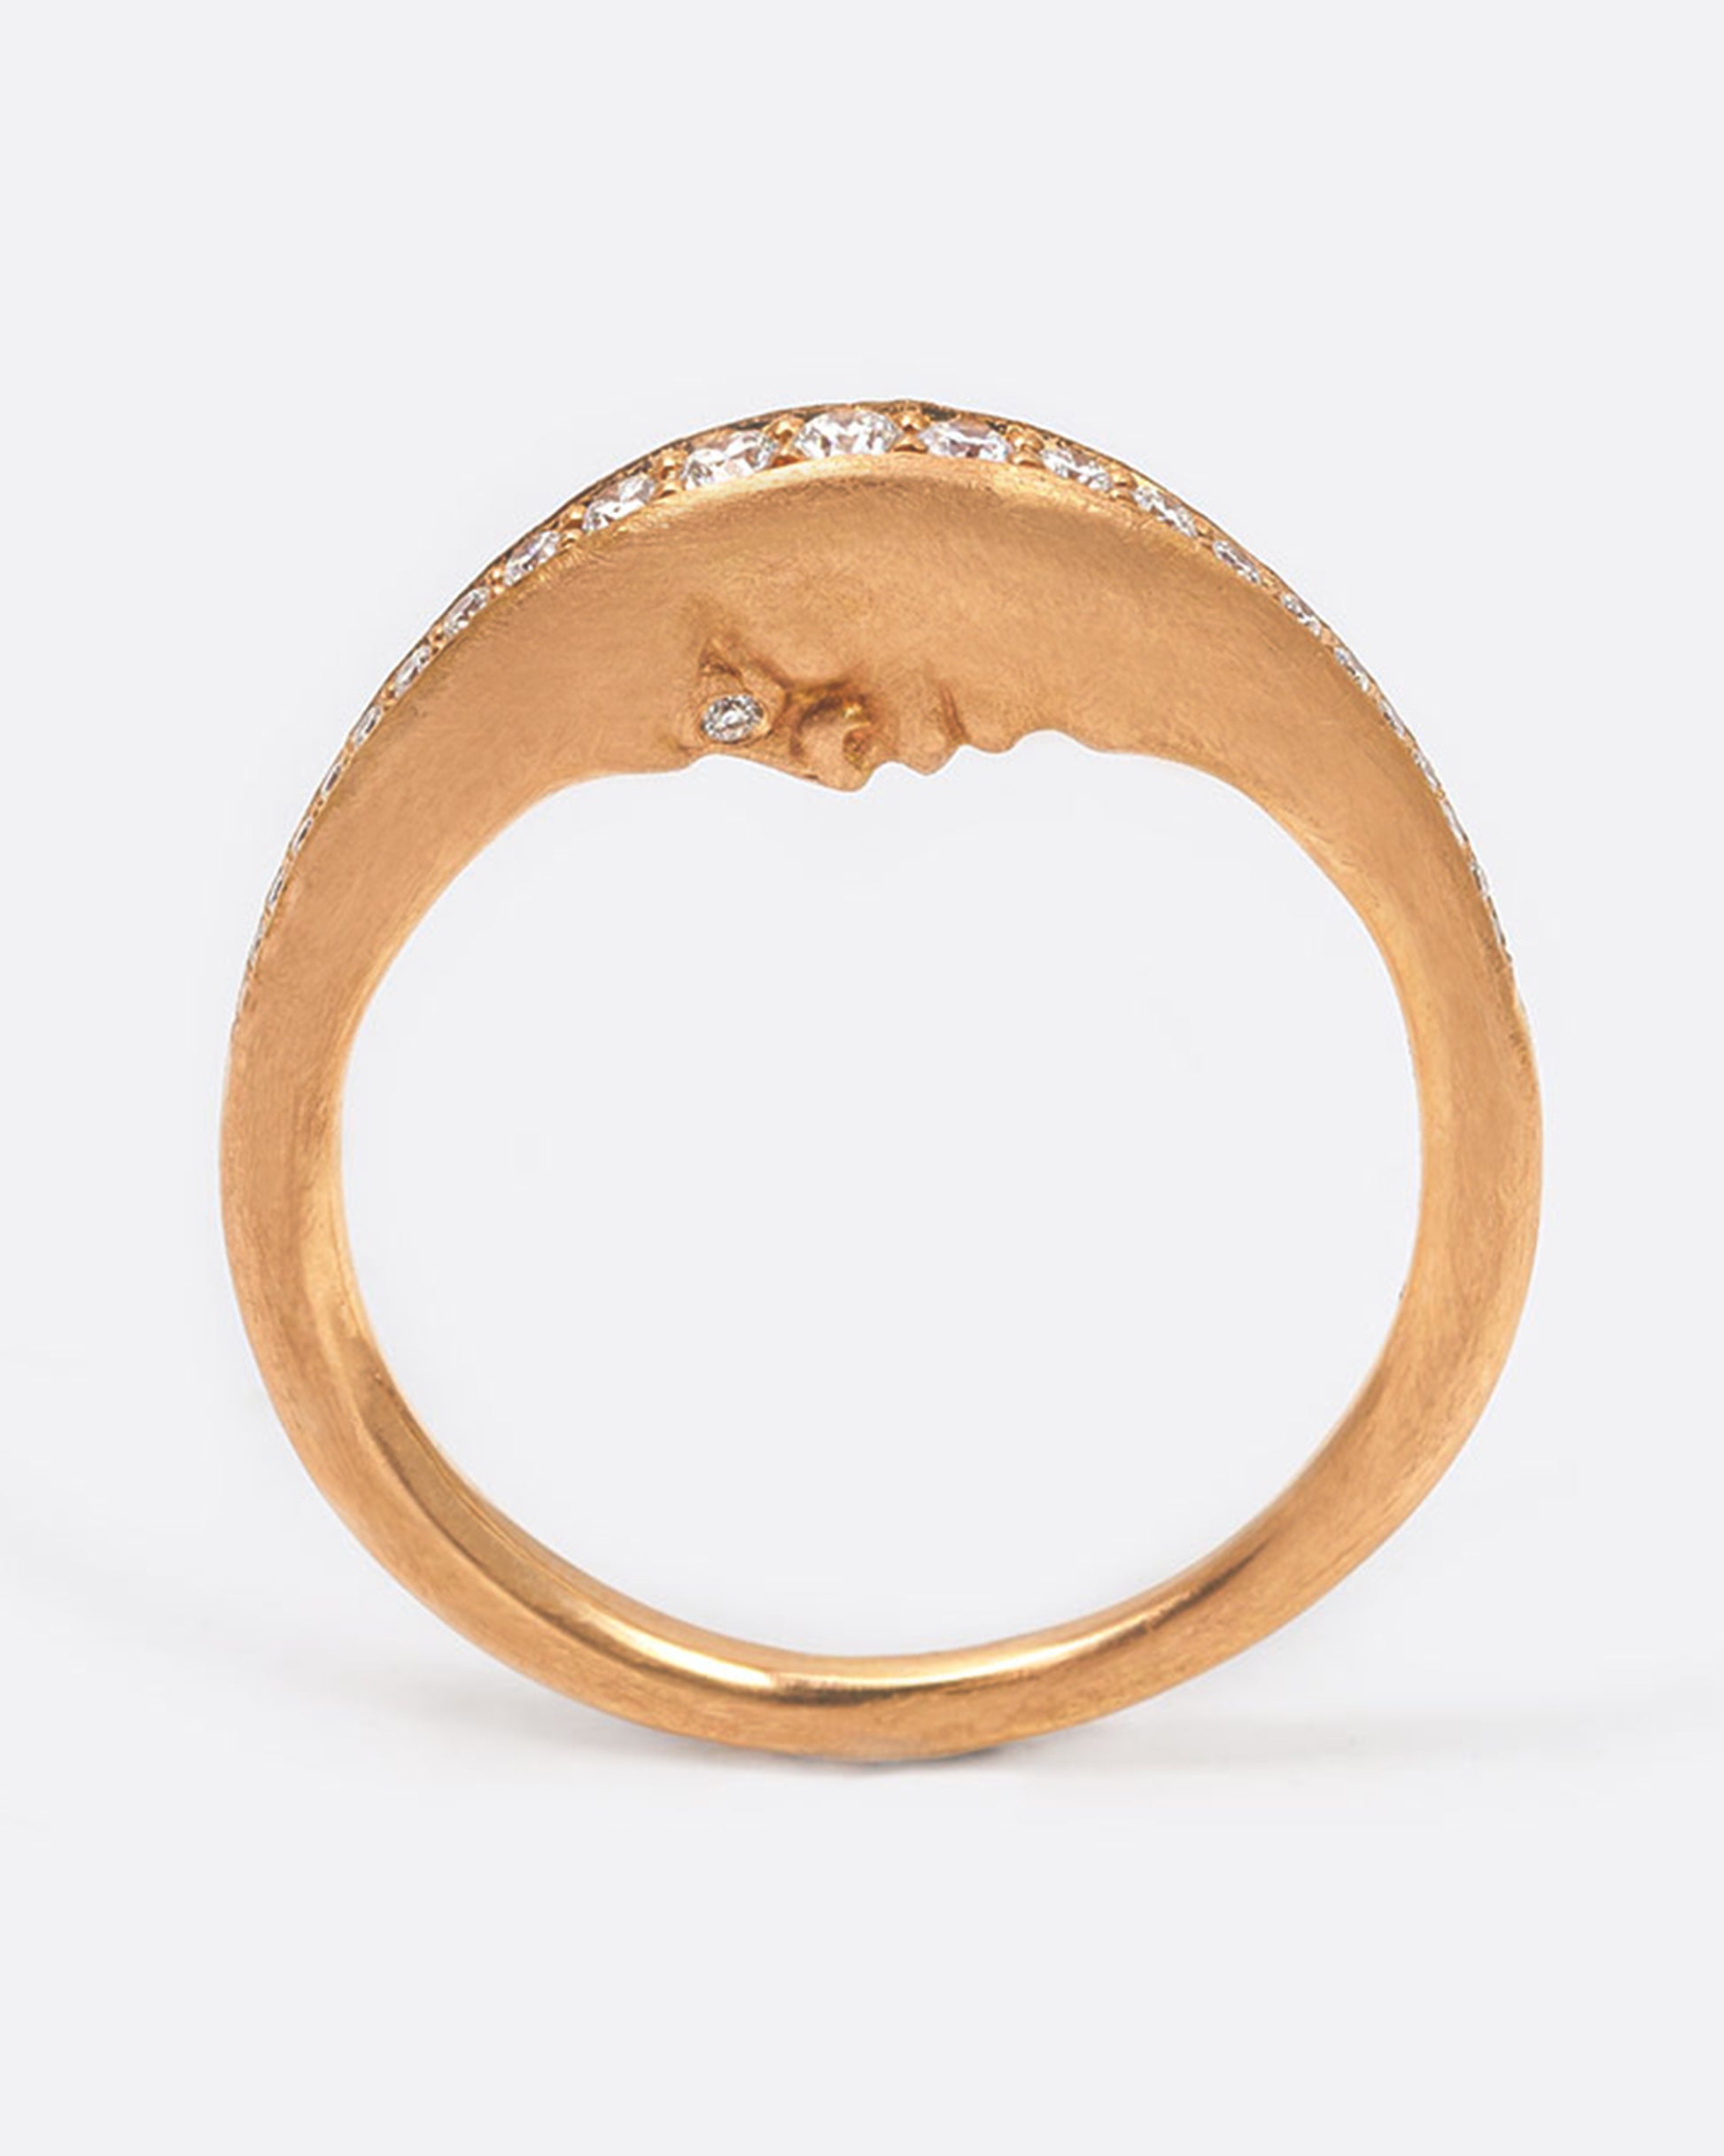 A sparkly take on Anthony Lent's classic crescent moon ring.